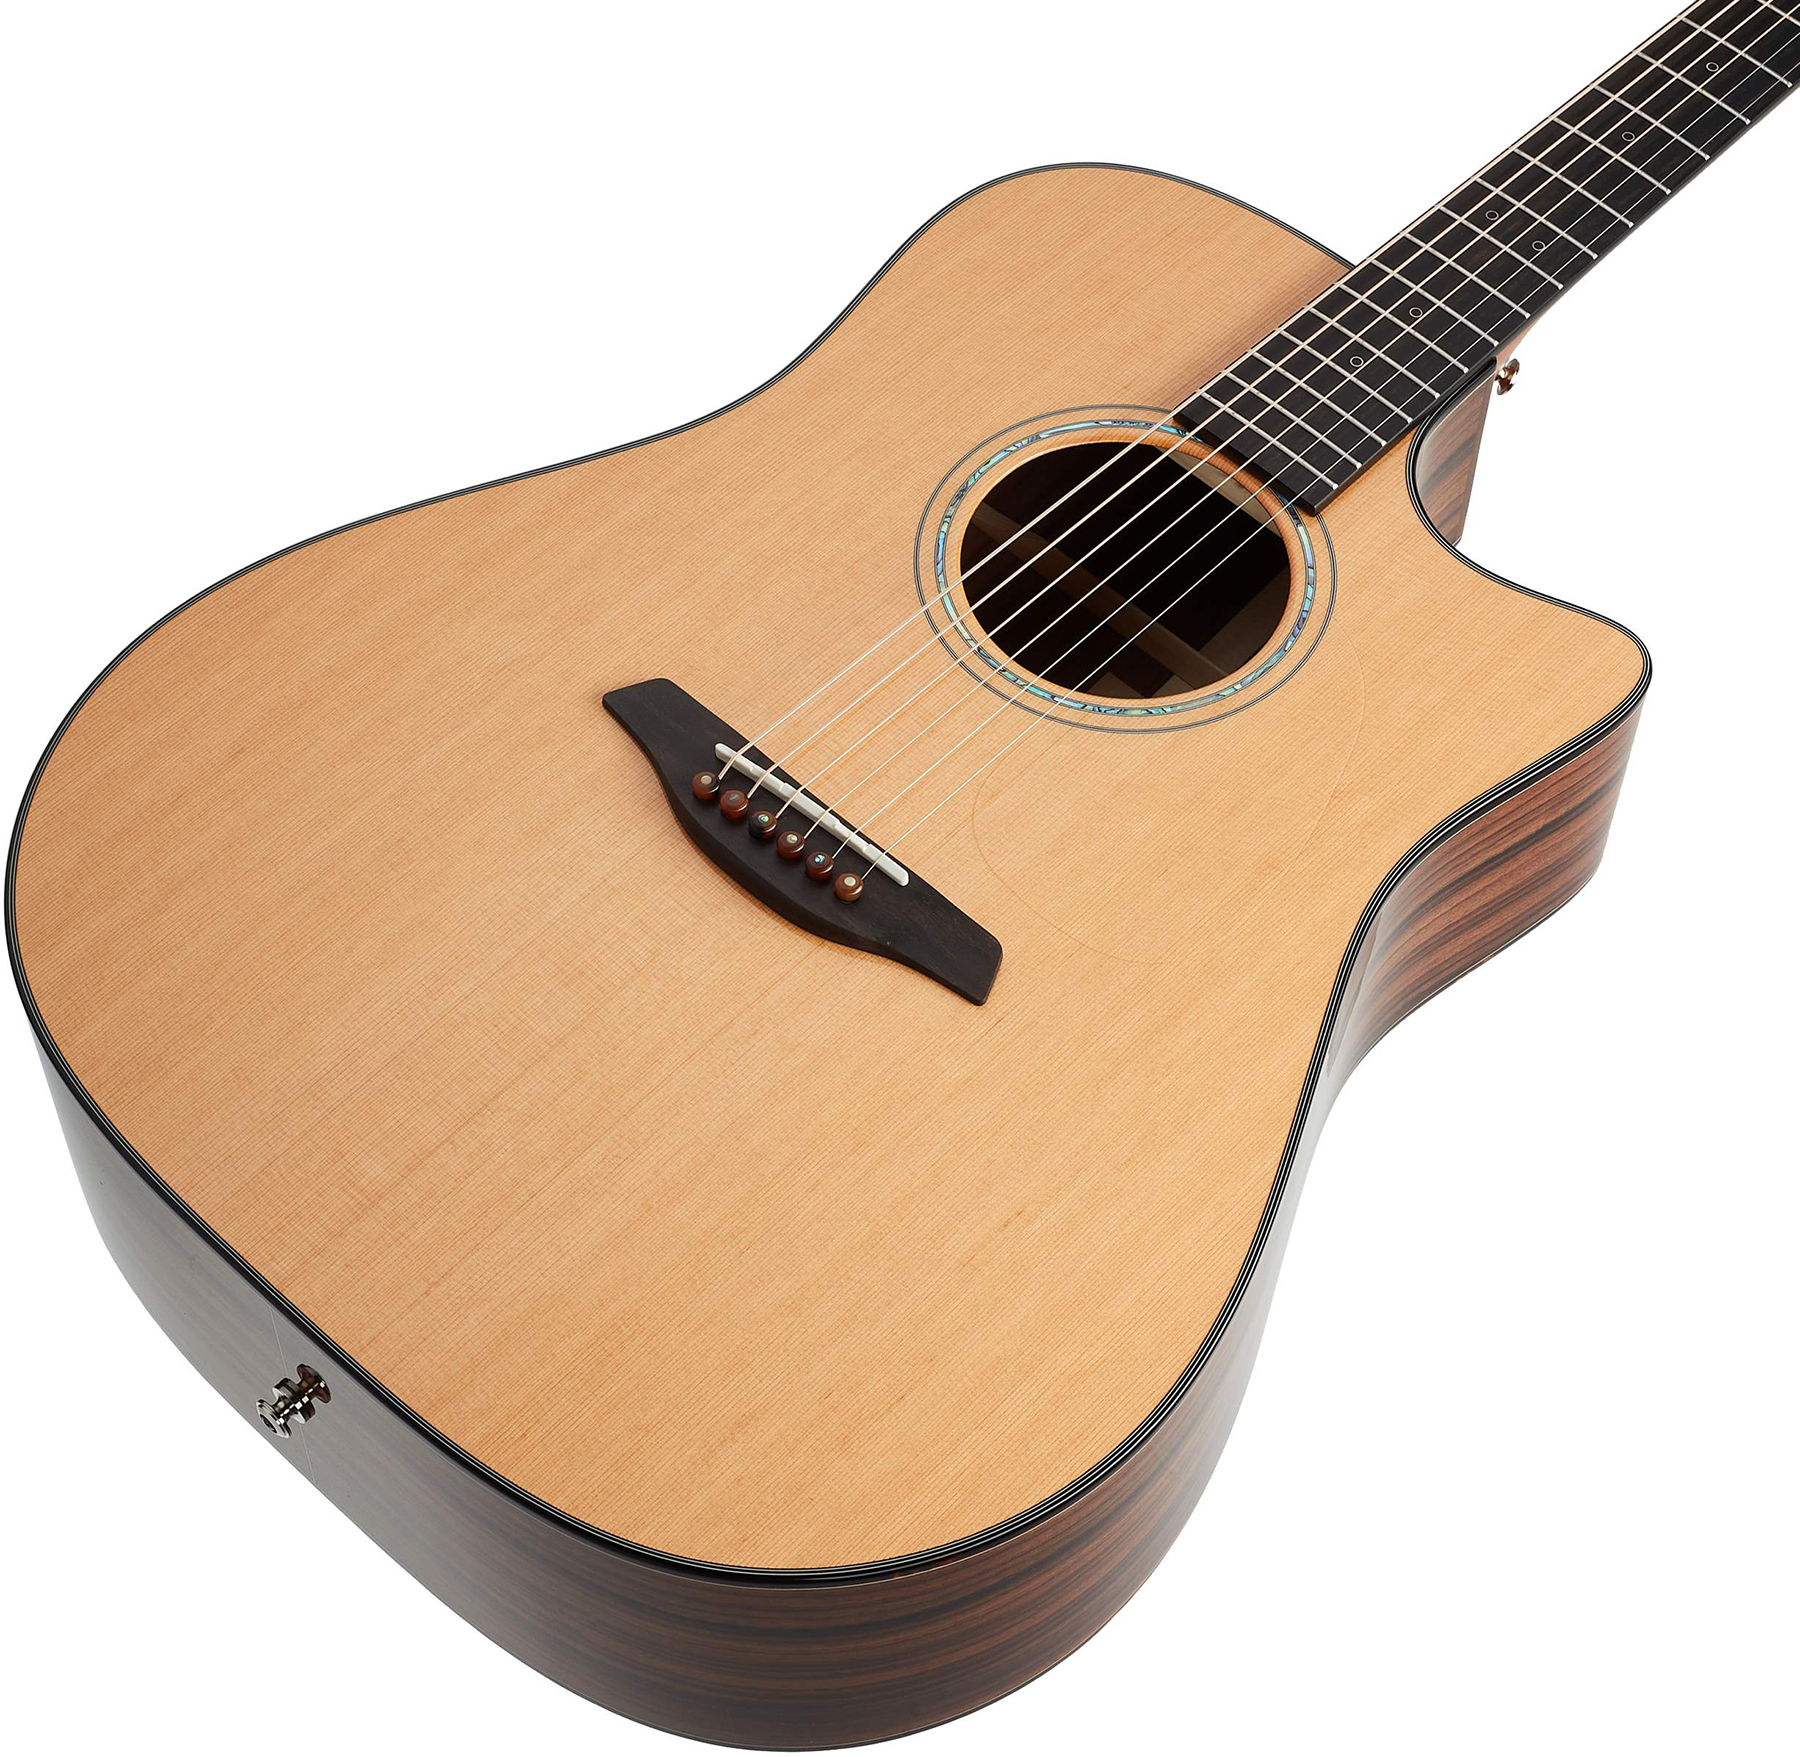 Furch Dc-cr Lrb1 Yellow Dreadnought Cw Cedre Palissandre Eb - Natural Full-pore - Electro acoustic guitar - Variation 2